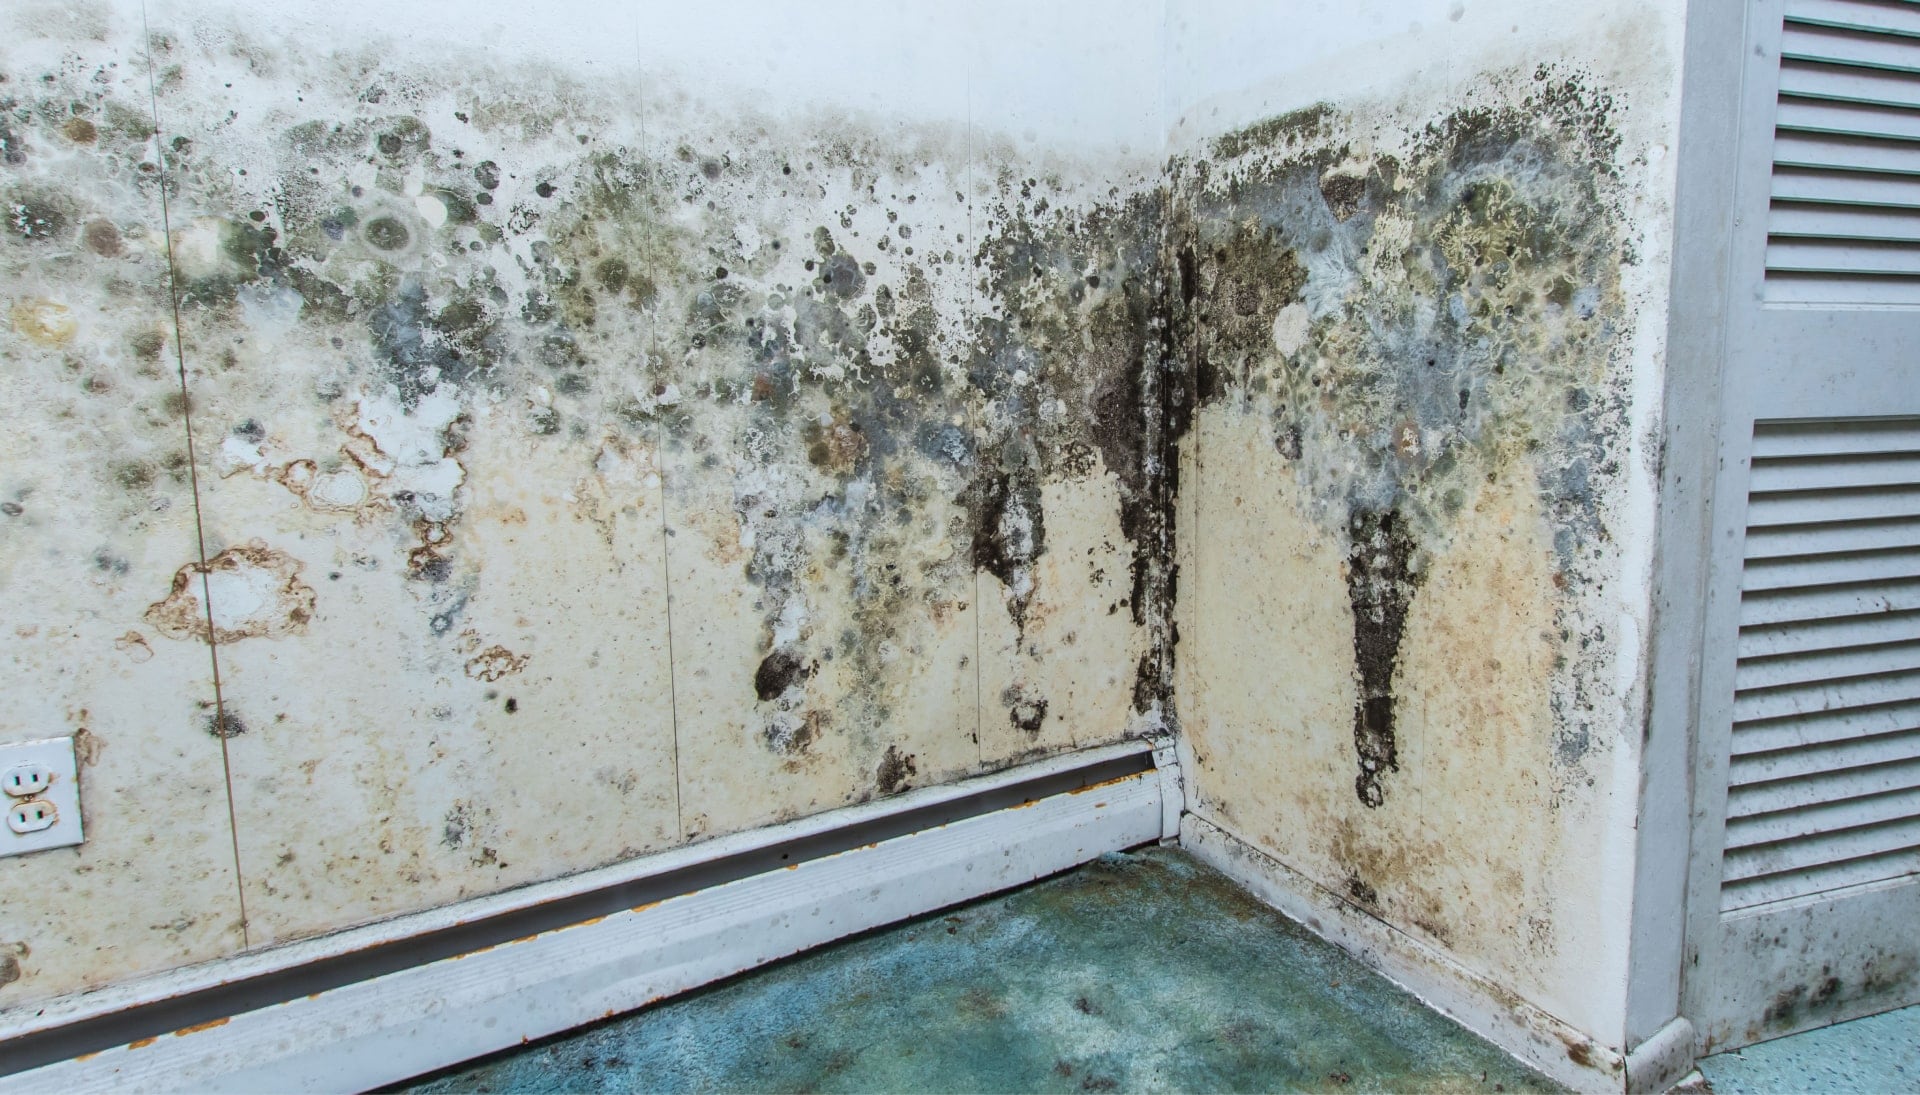 A mold remediation team using specialized techniques to remove mold damage and control odors in a Milwaukee property, with a focus on safety and efficiency